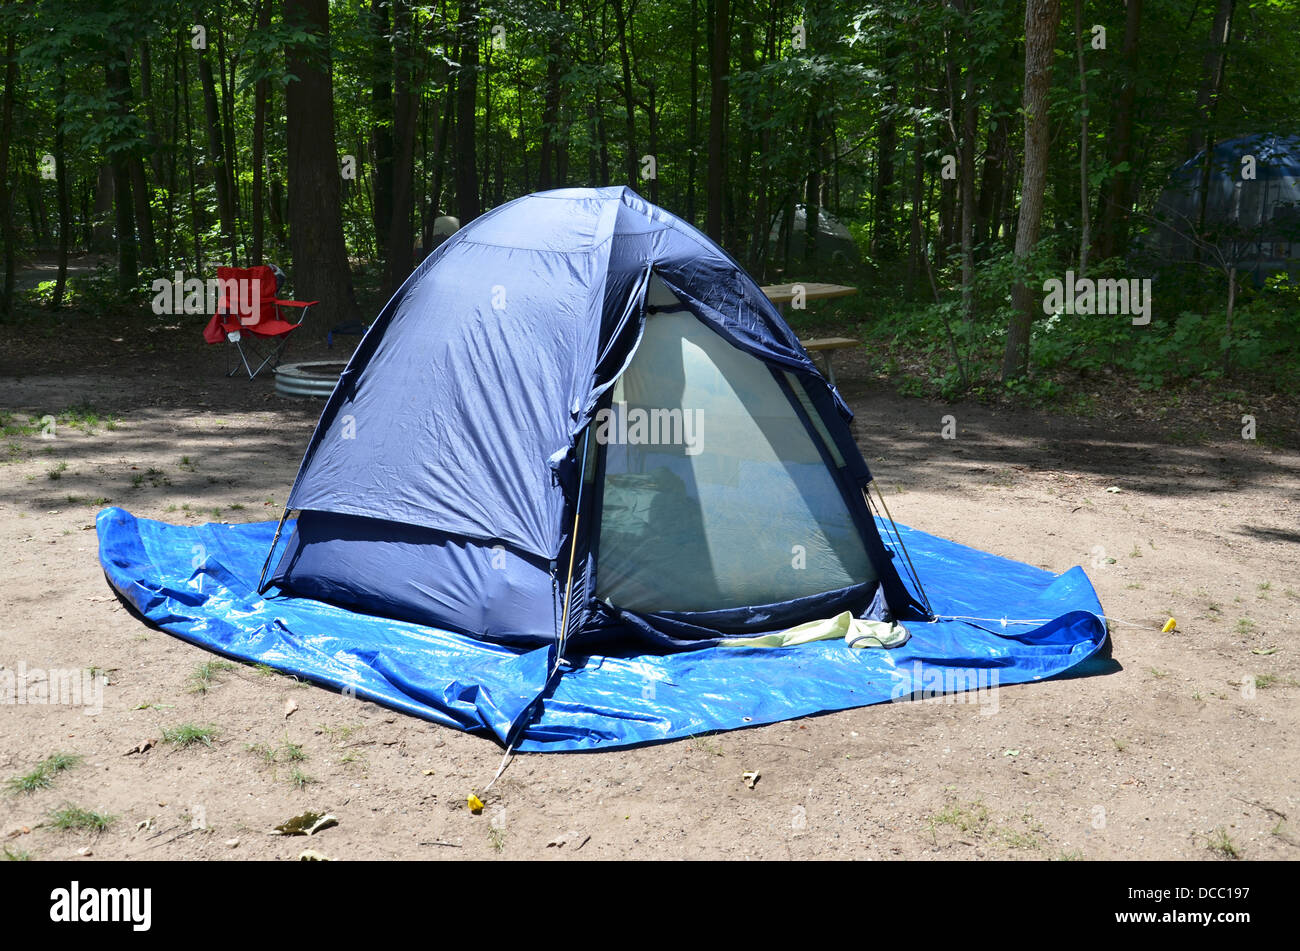 Campsite showing tent among trees Stock Photo